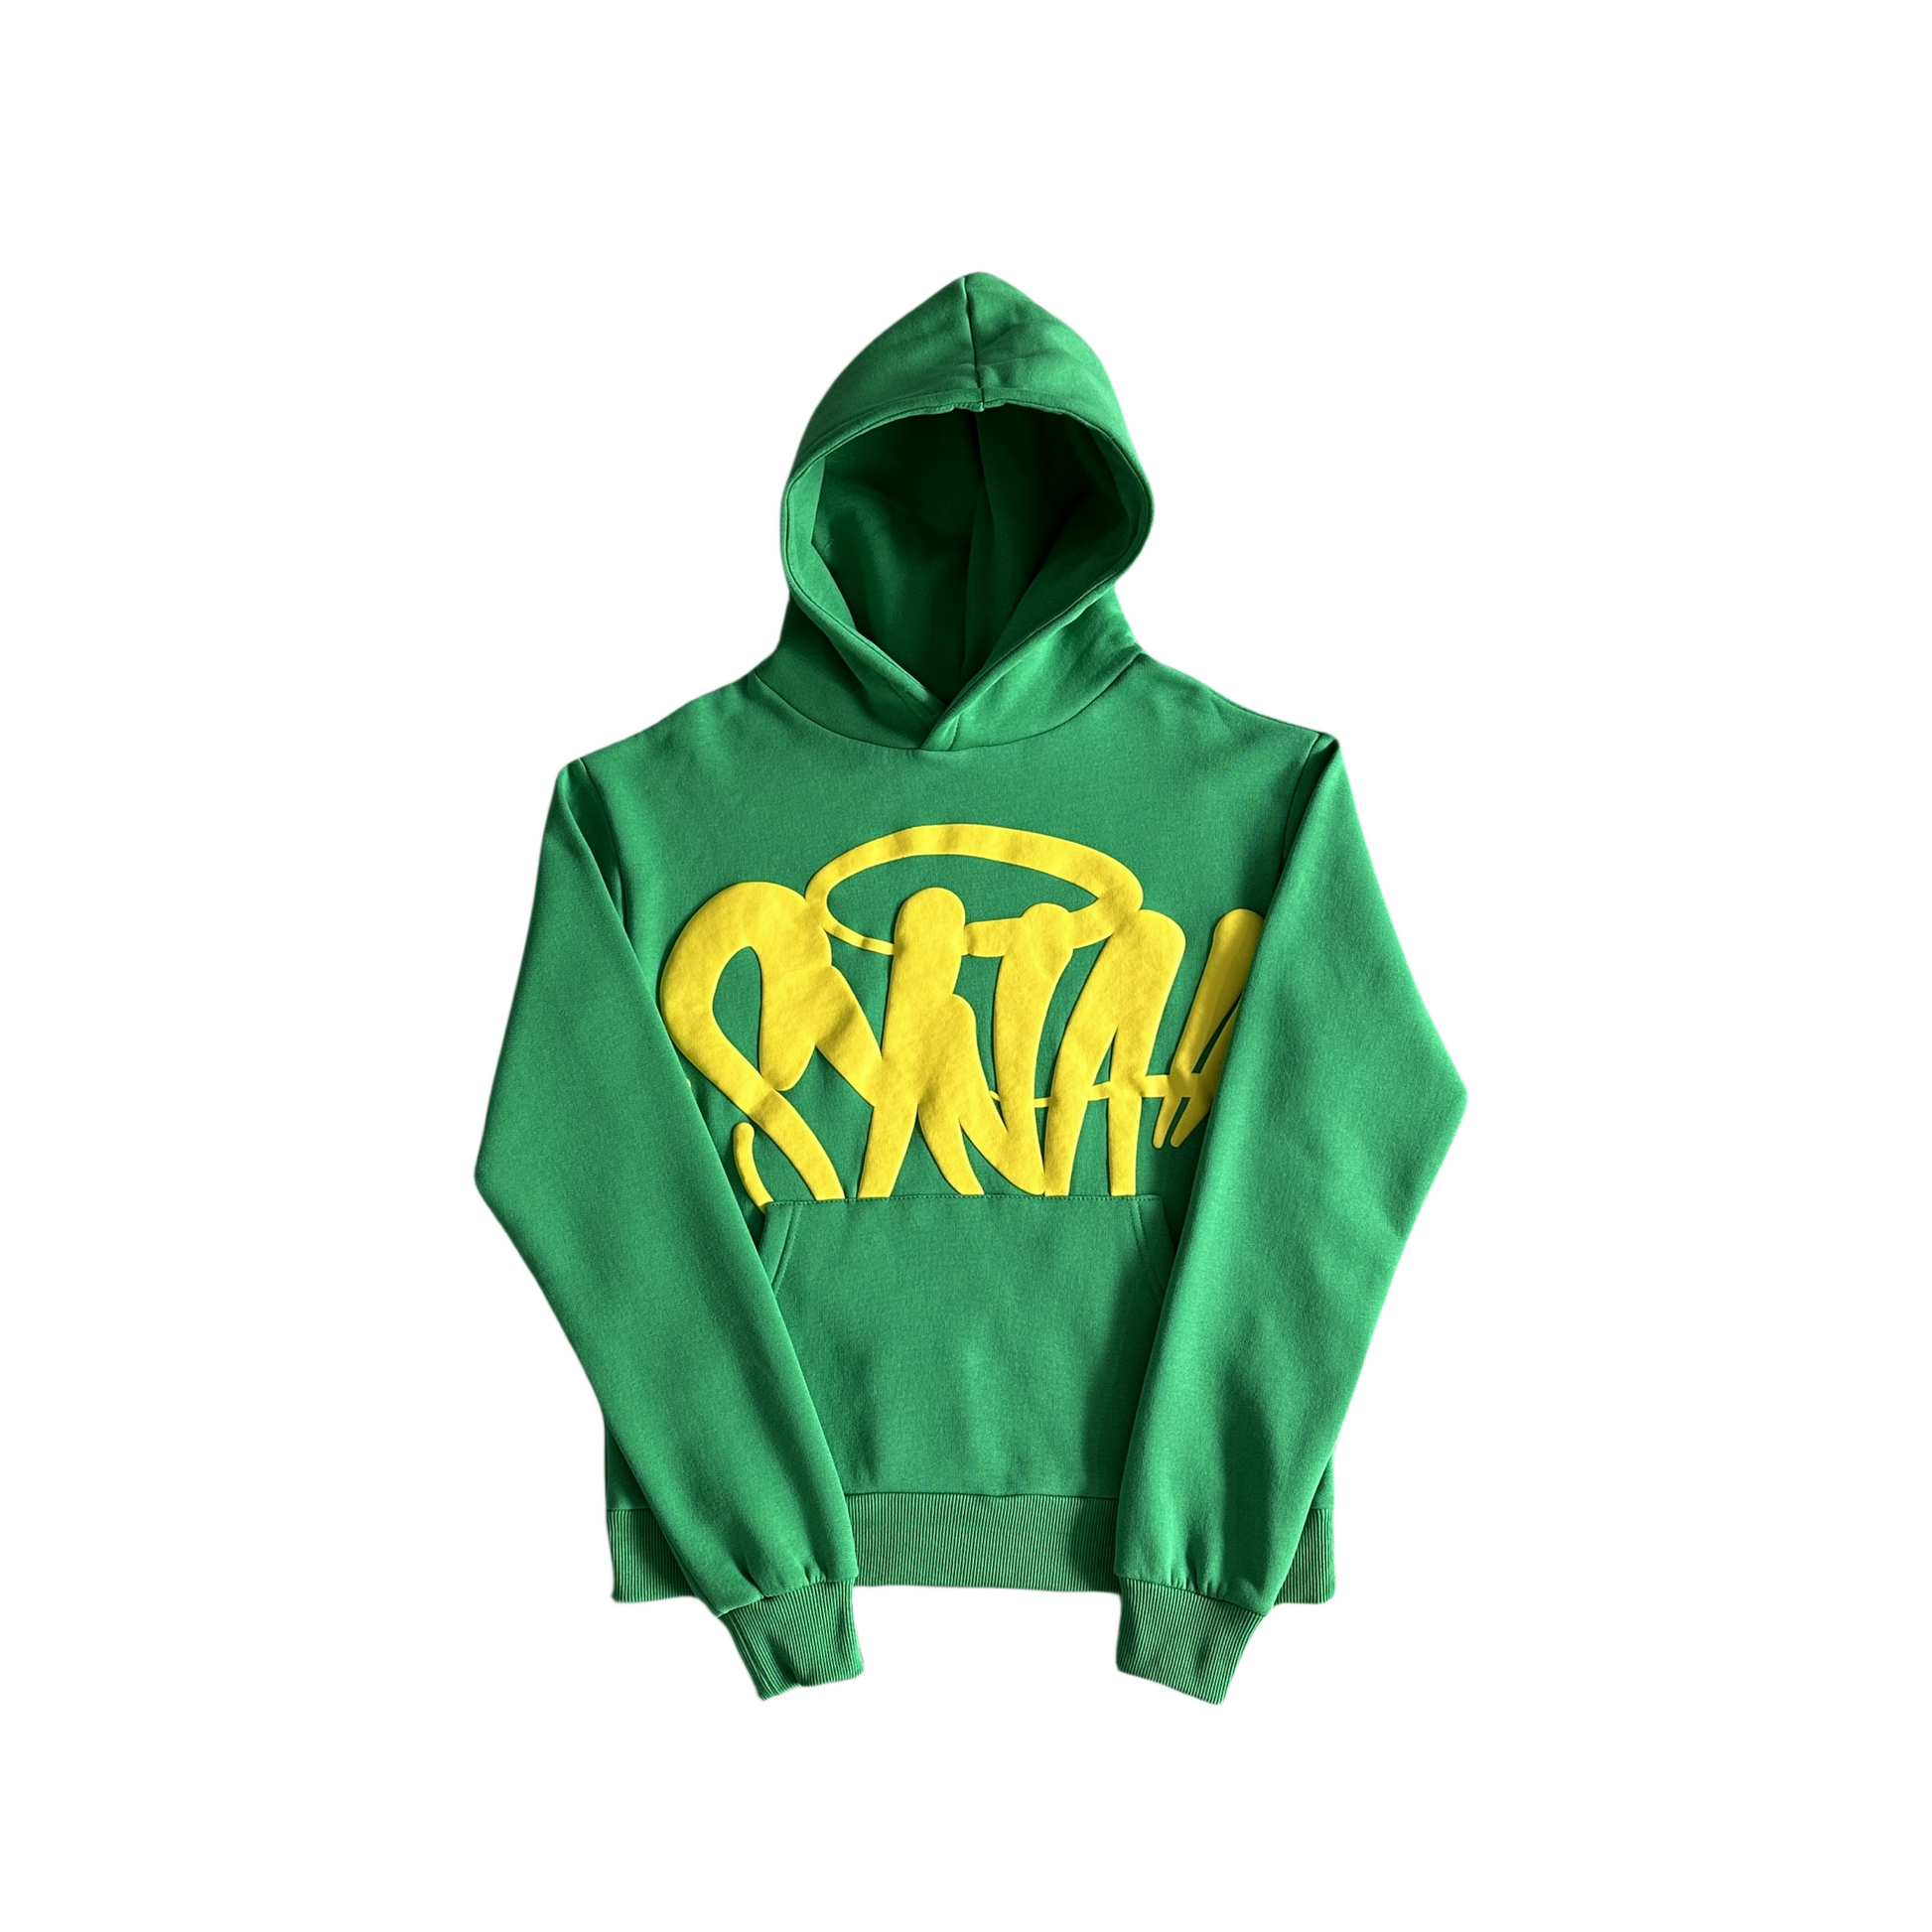 Syna World Team Hood Twinset Suit Hoodie And Pants Tracksuit 